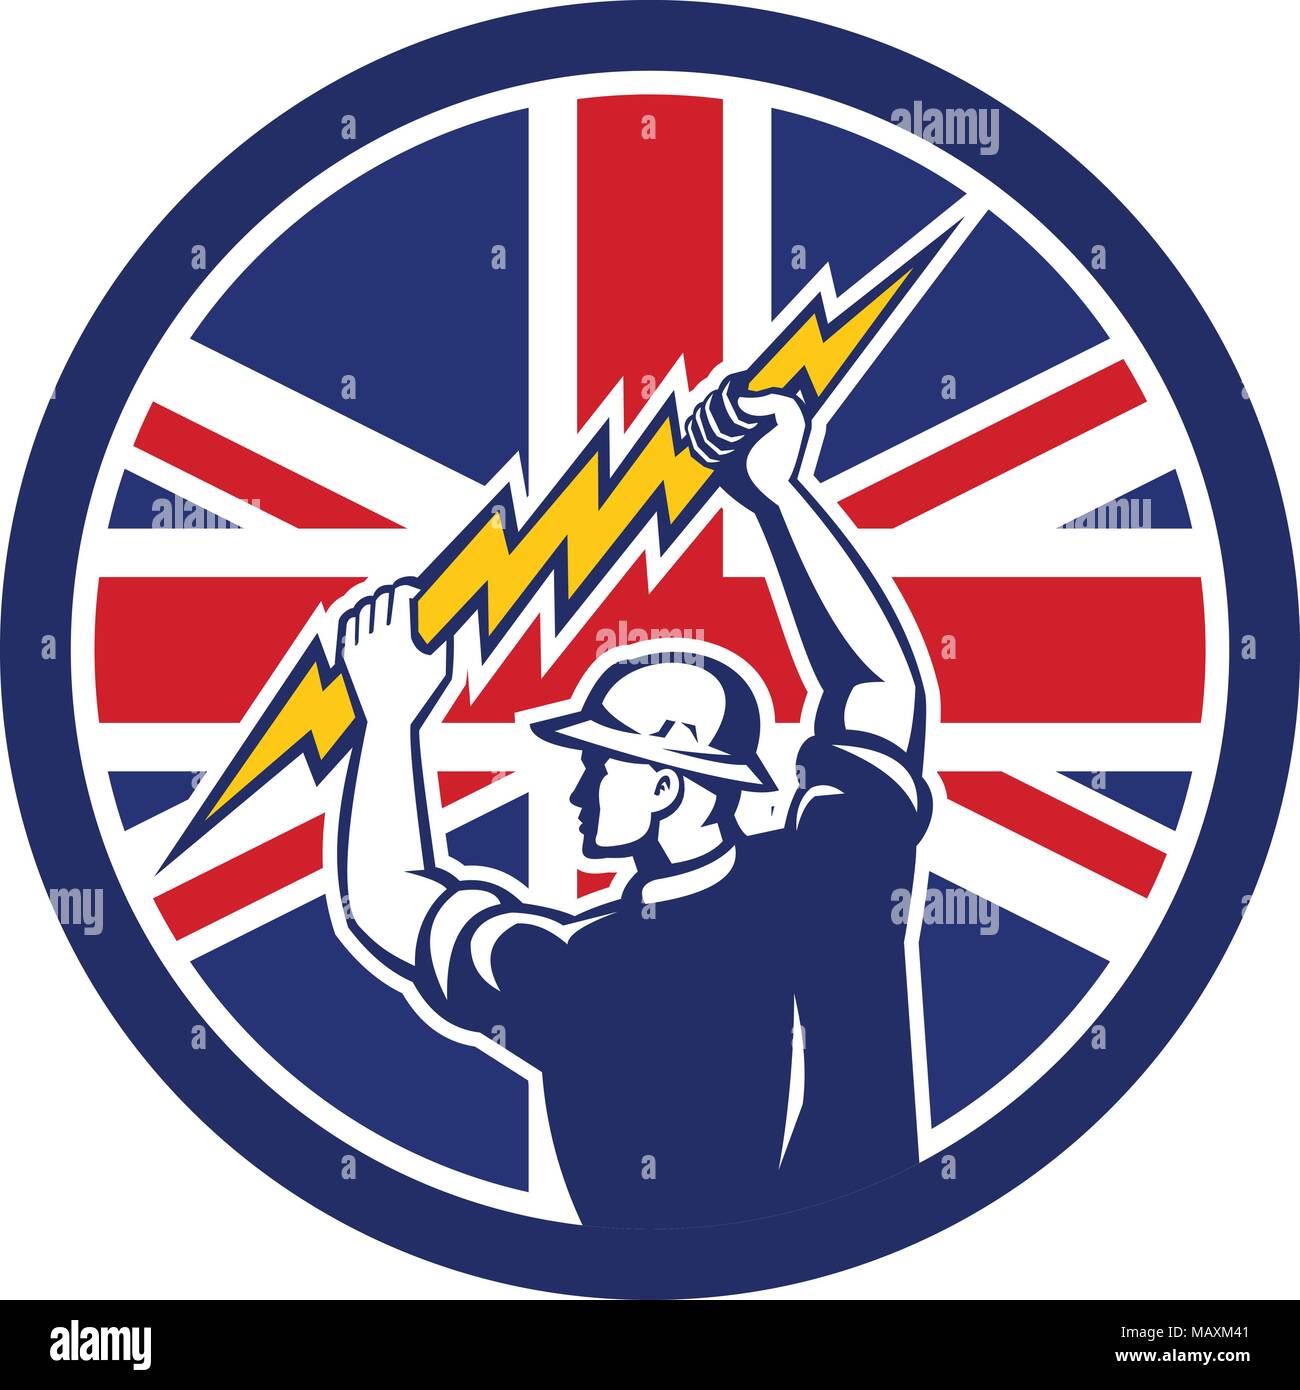 Icon retro style illustration of a British electrician or power lineman holding lightning bolt with United Kingdom UK, Great Britain Union Jack flag s Stock Vector